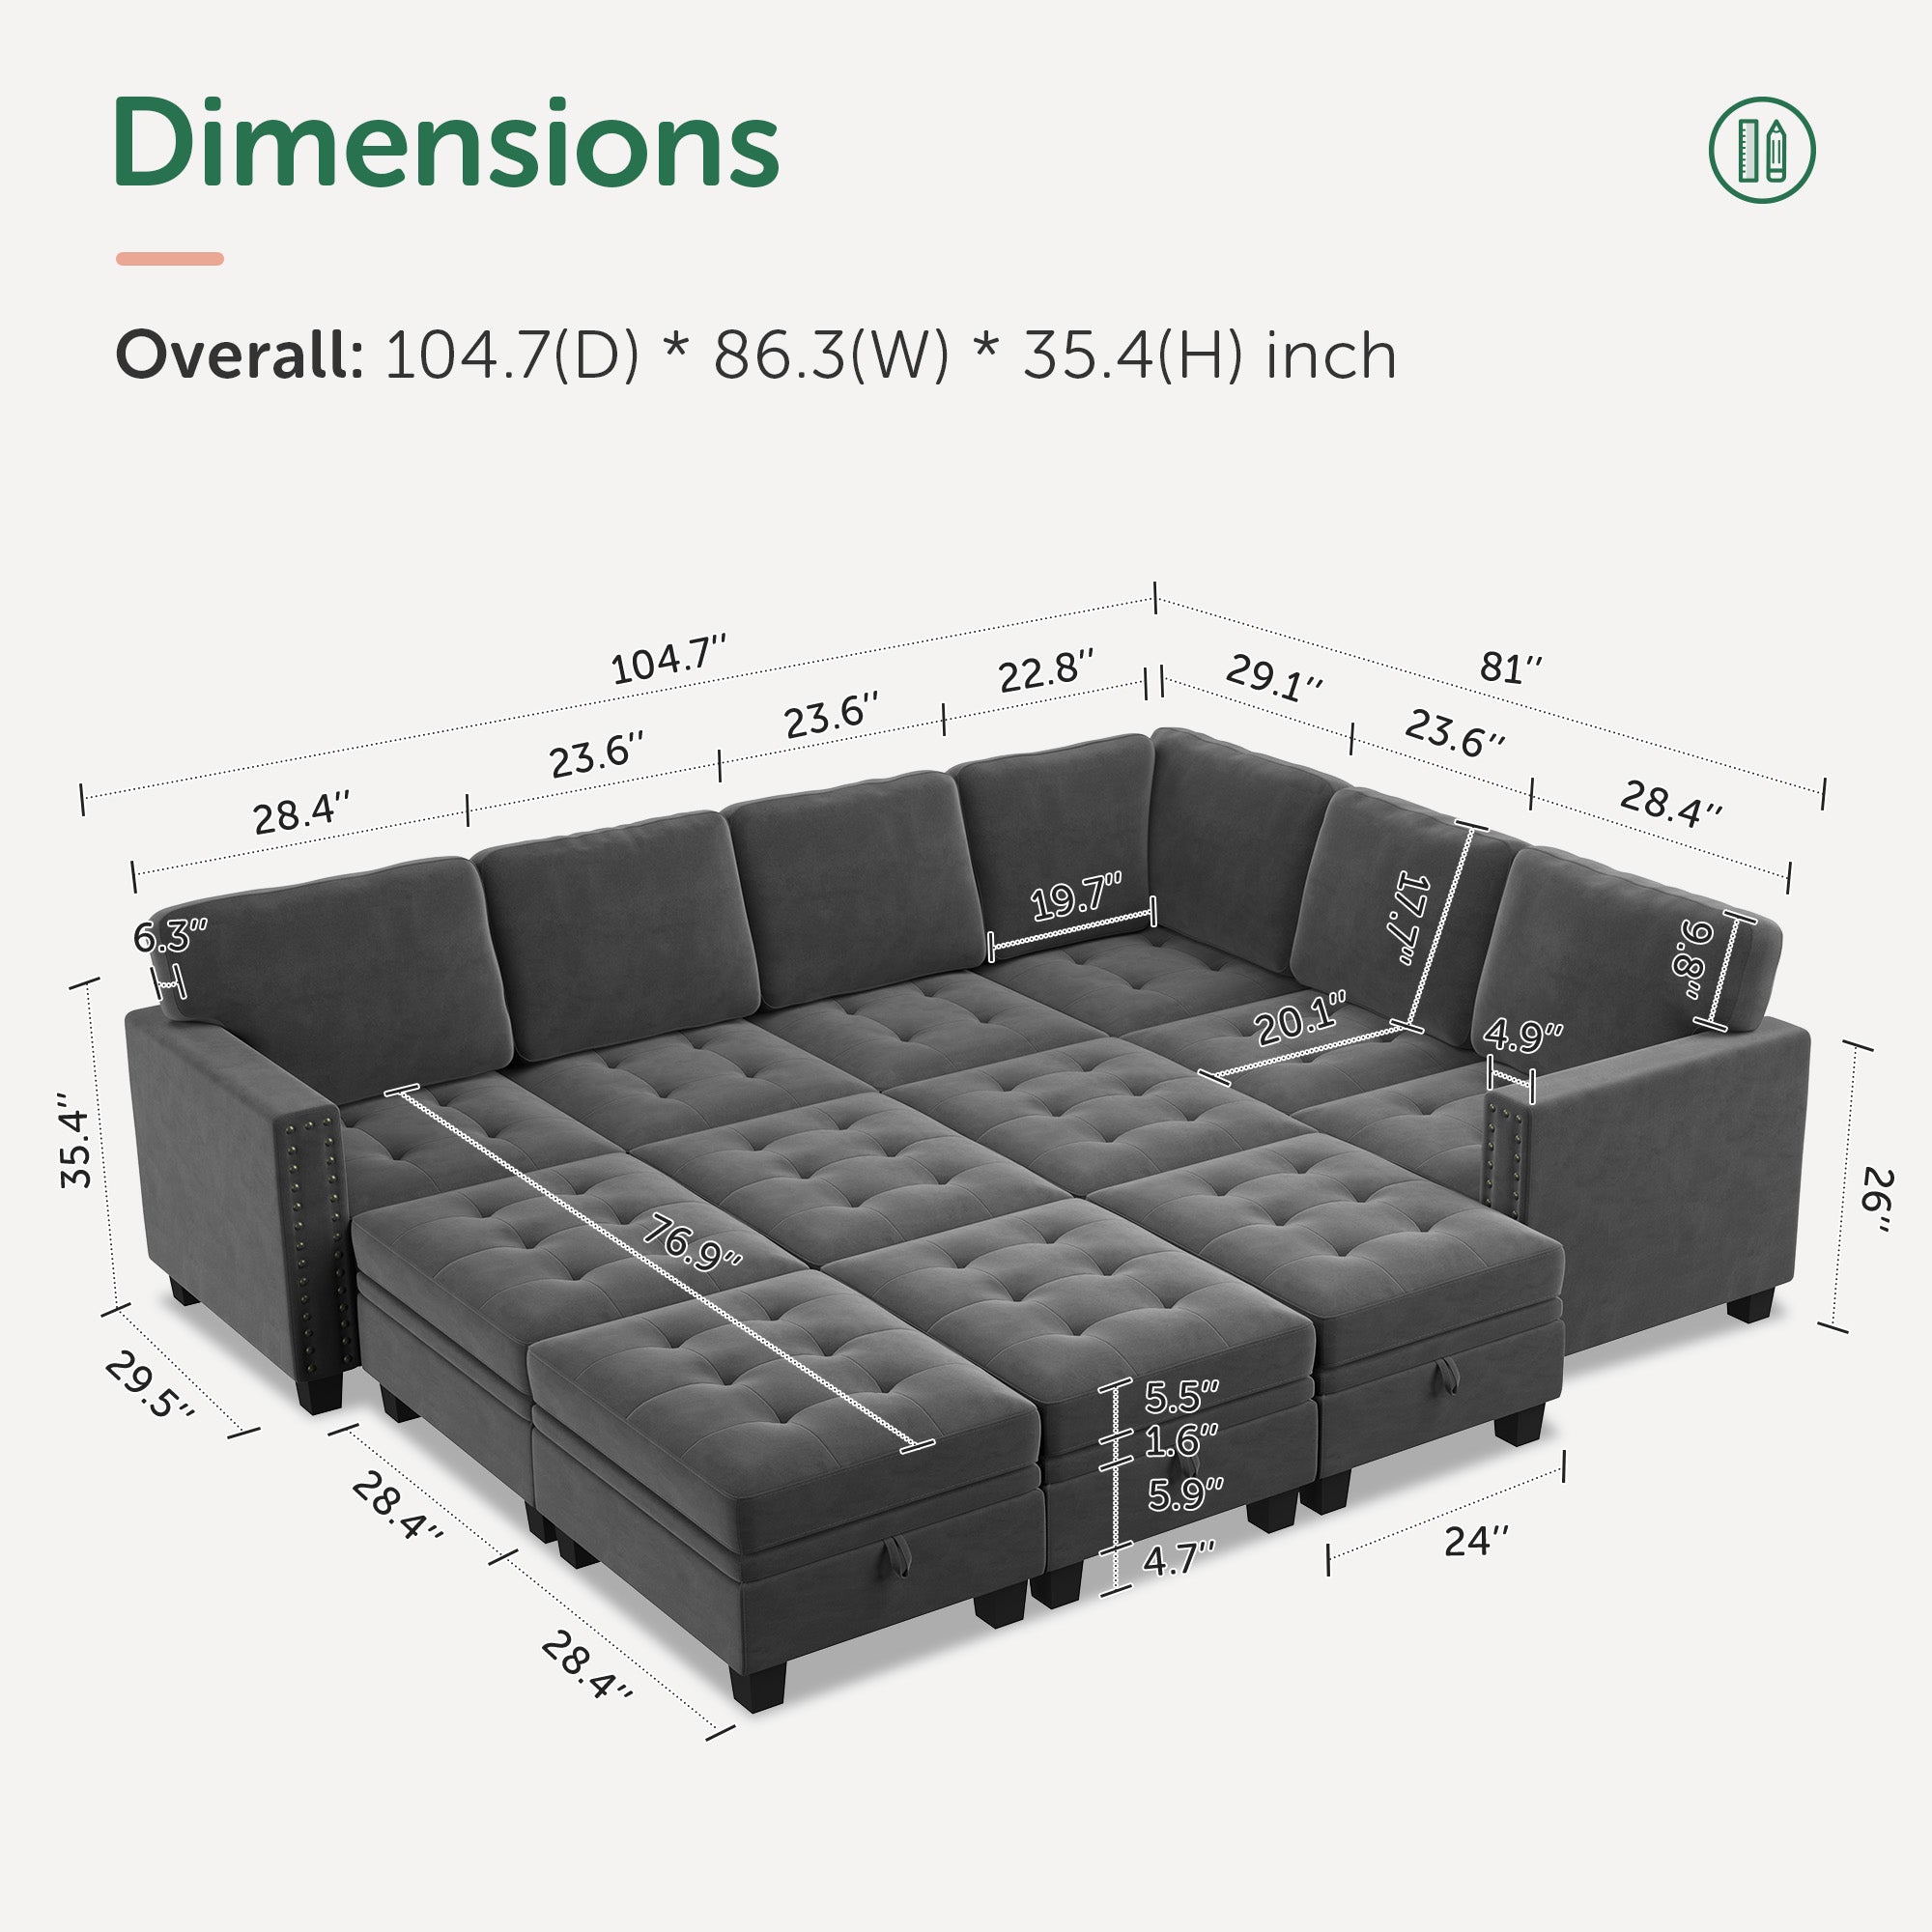  Velvet Modular Sleeper Sectional With Storage Space With Measurements